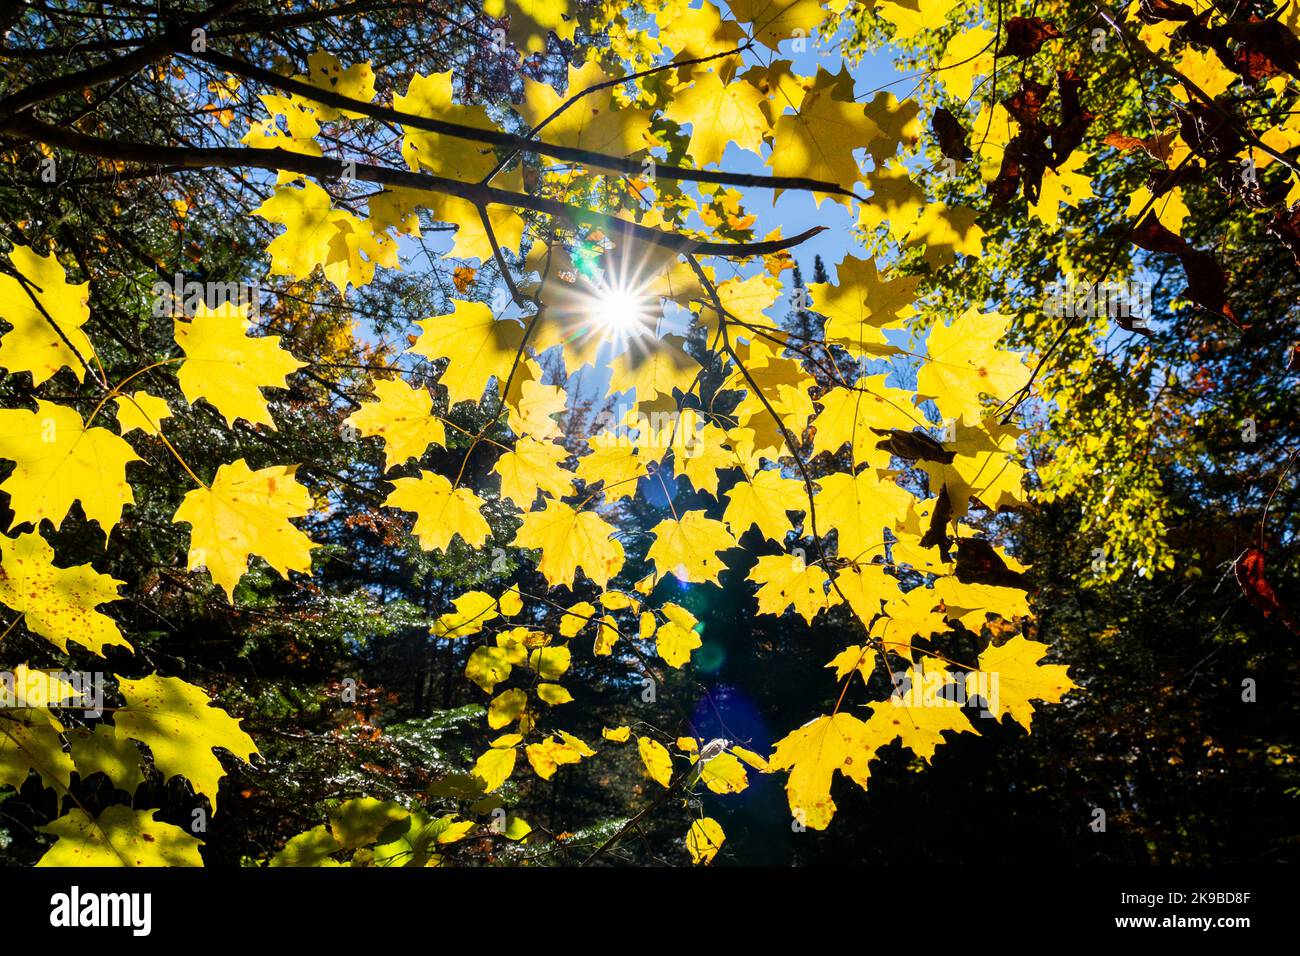 Colorful autumn foliage with sunrays shining through the leaves Stock Photo